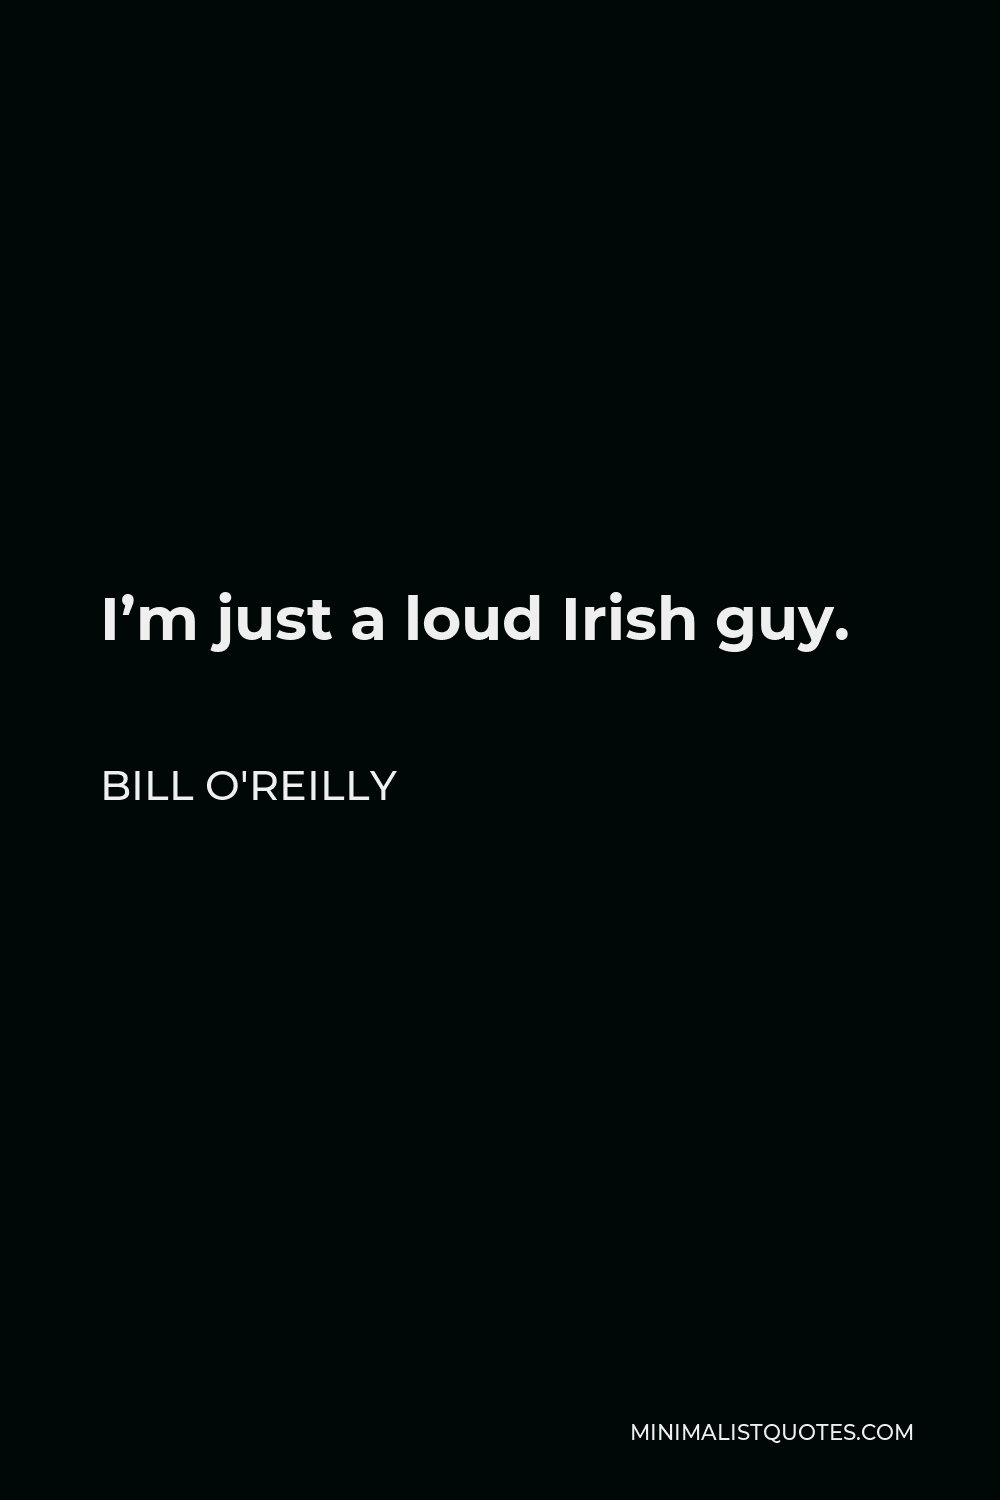 Bill O'Reilly Quote - I’m just a loud Irish guy.